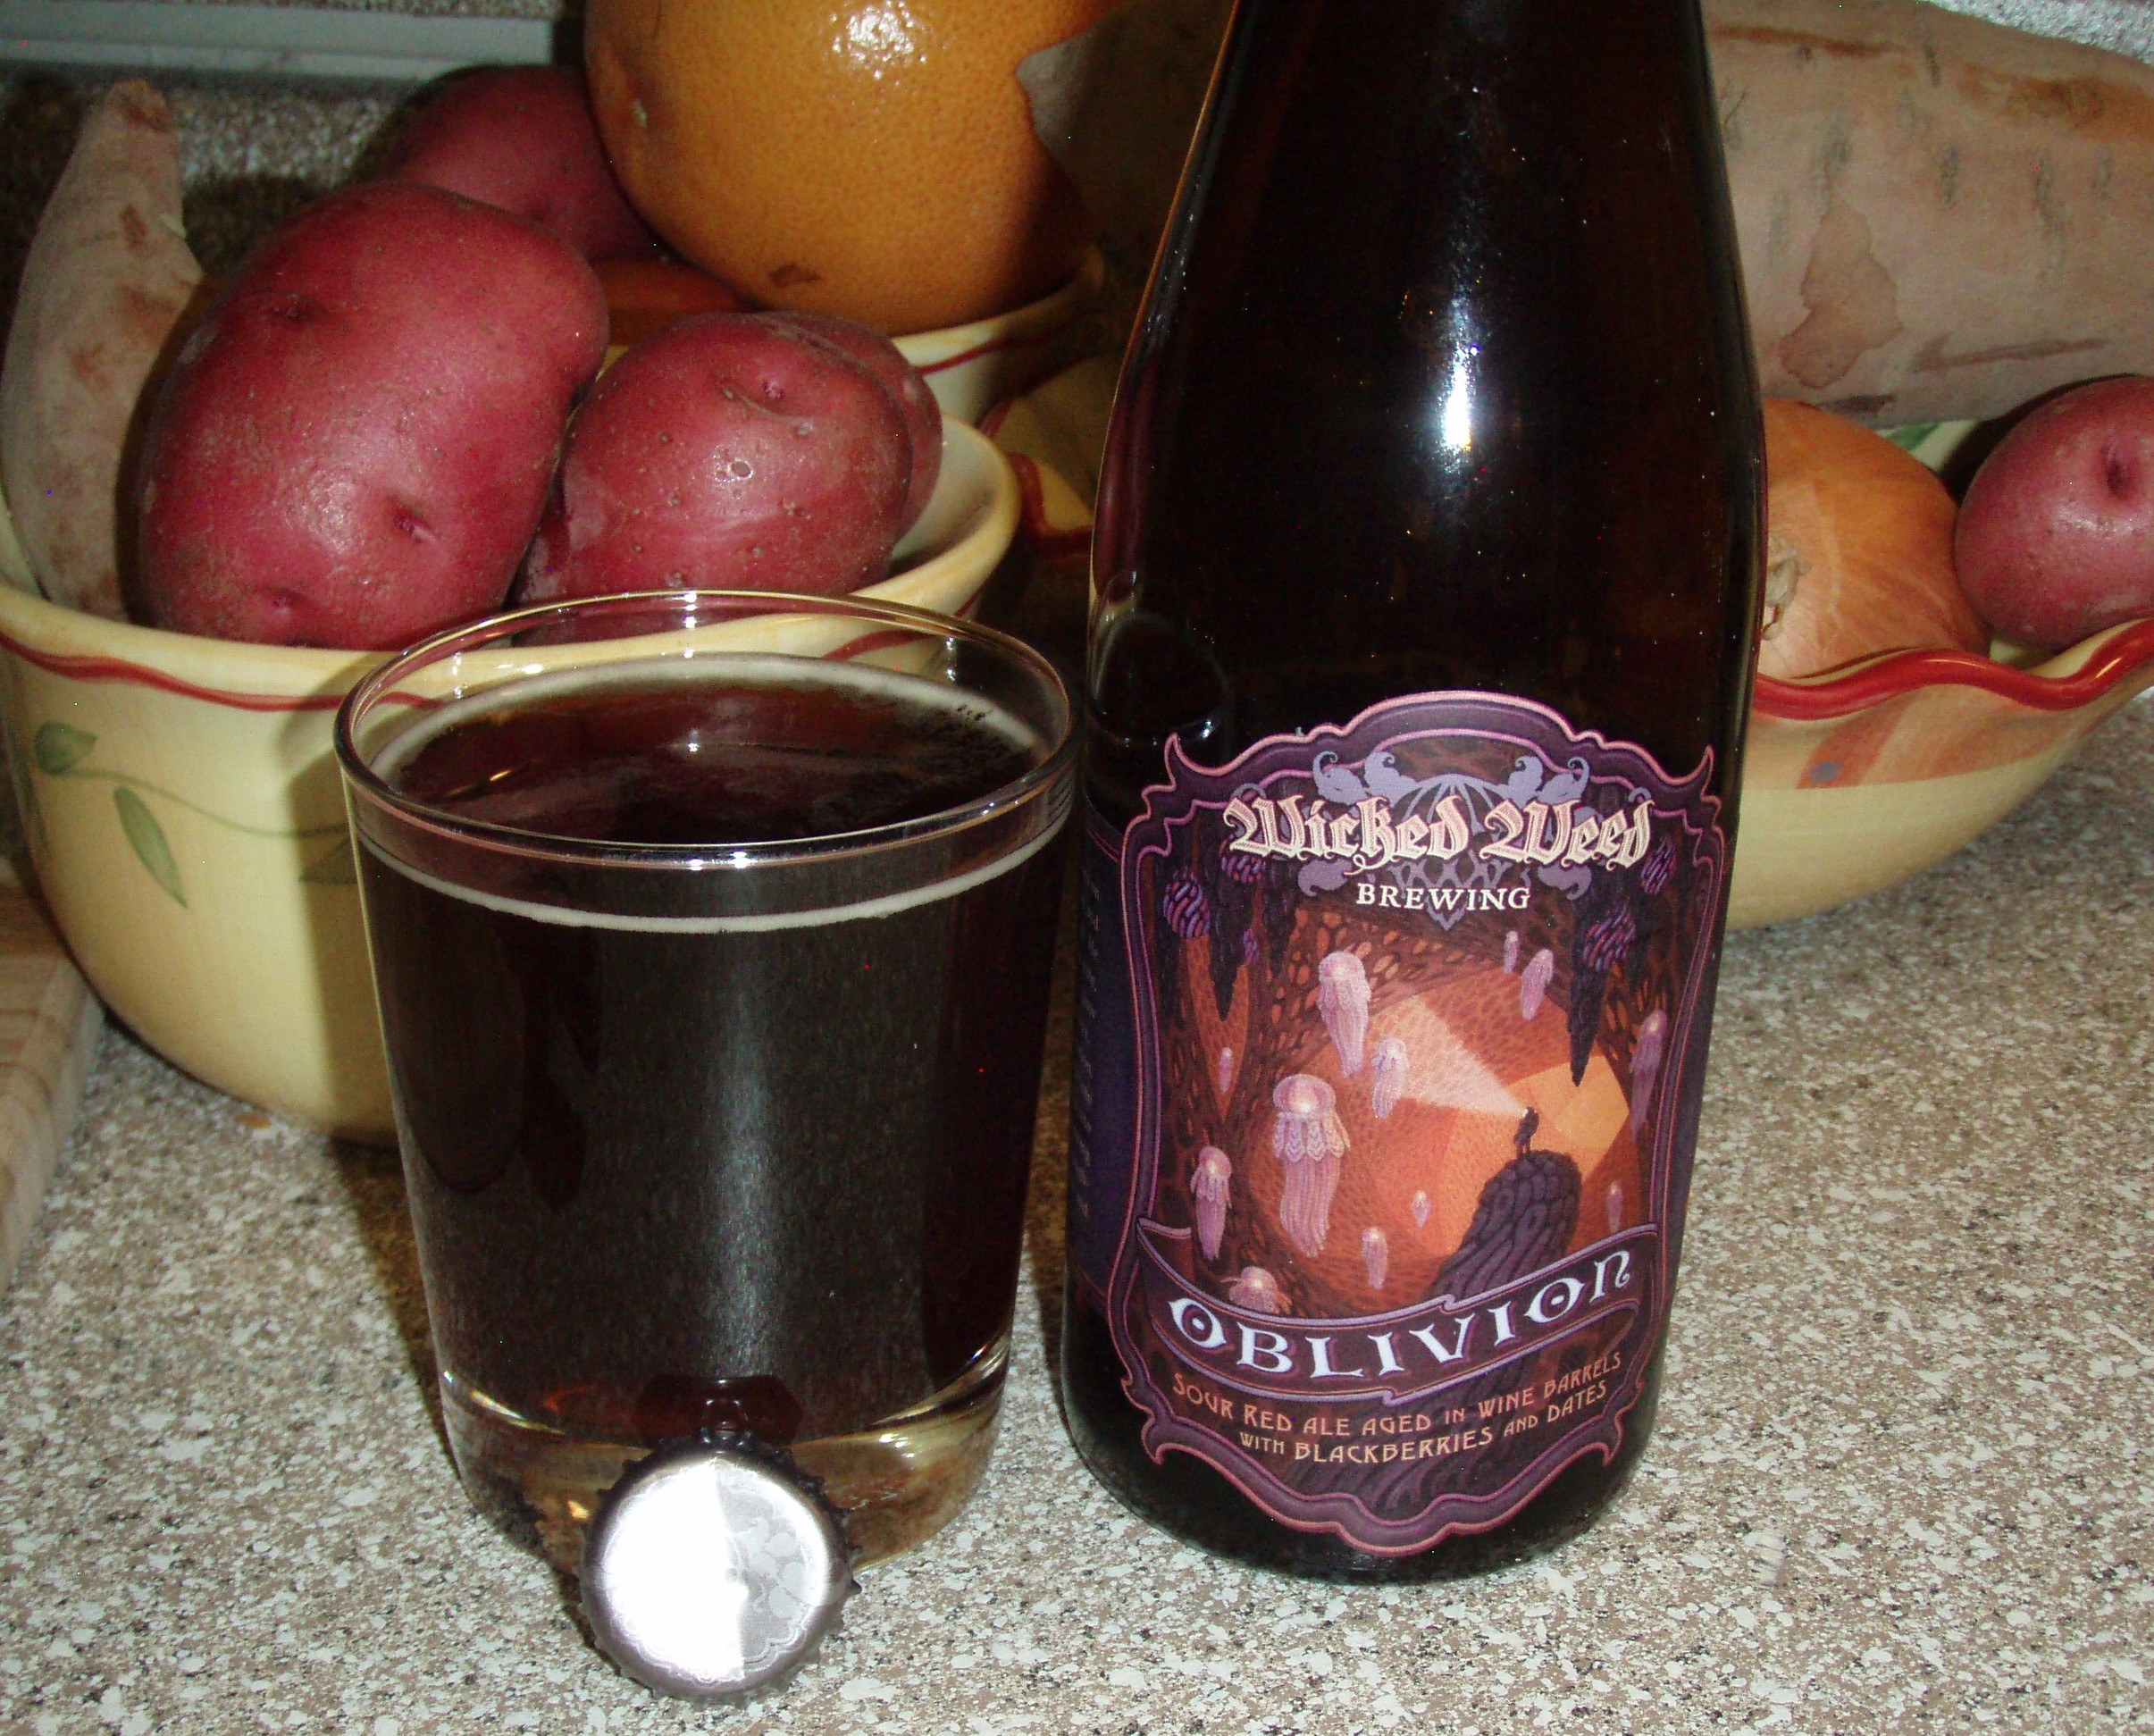 Wicked Weed | Oblivion